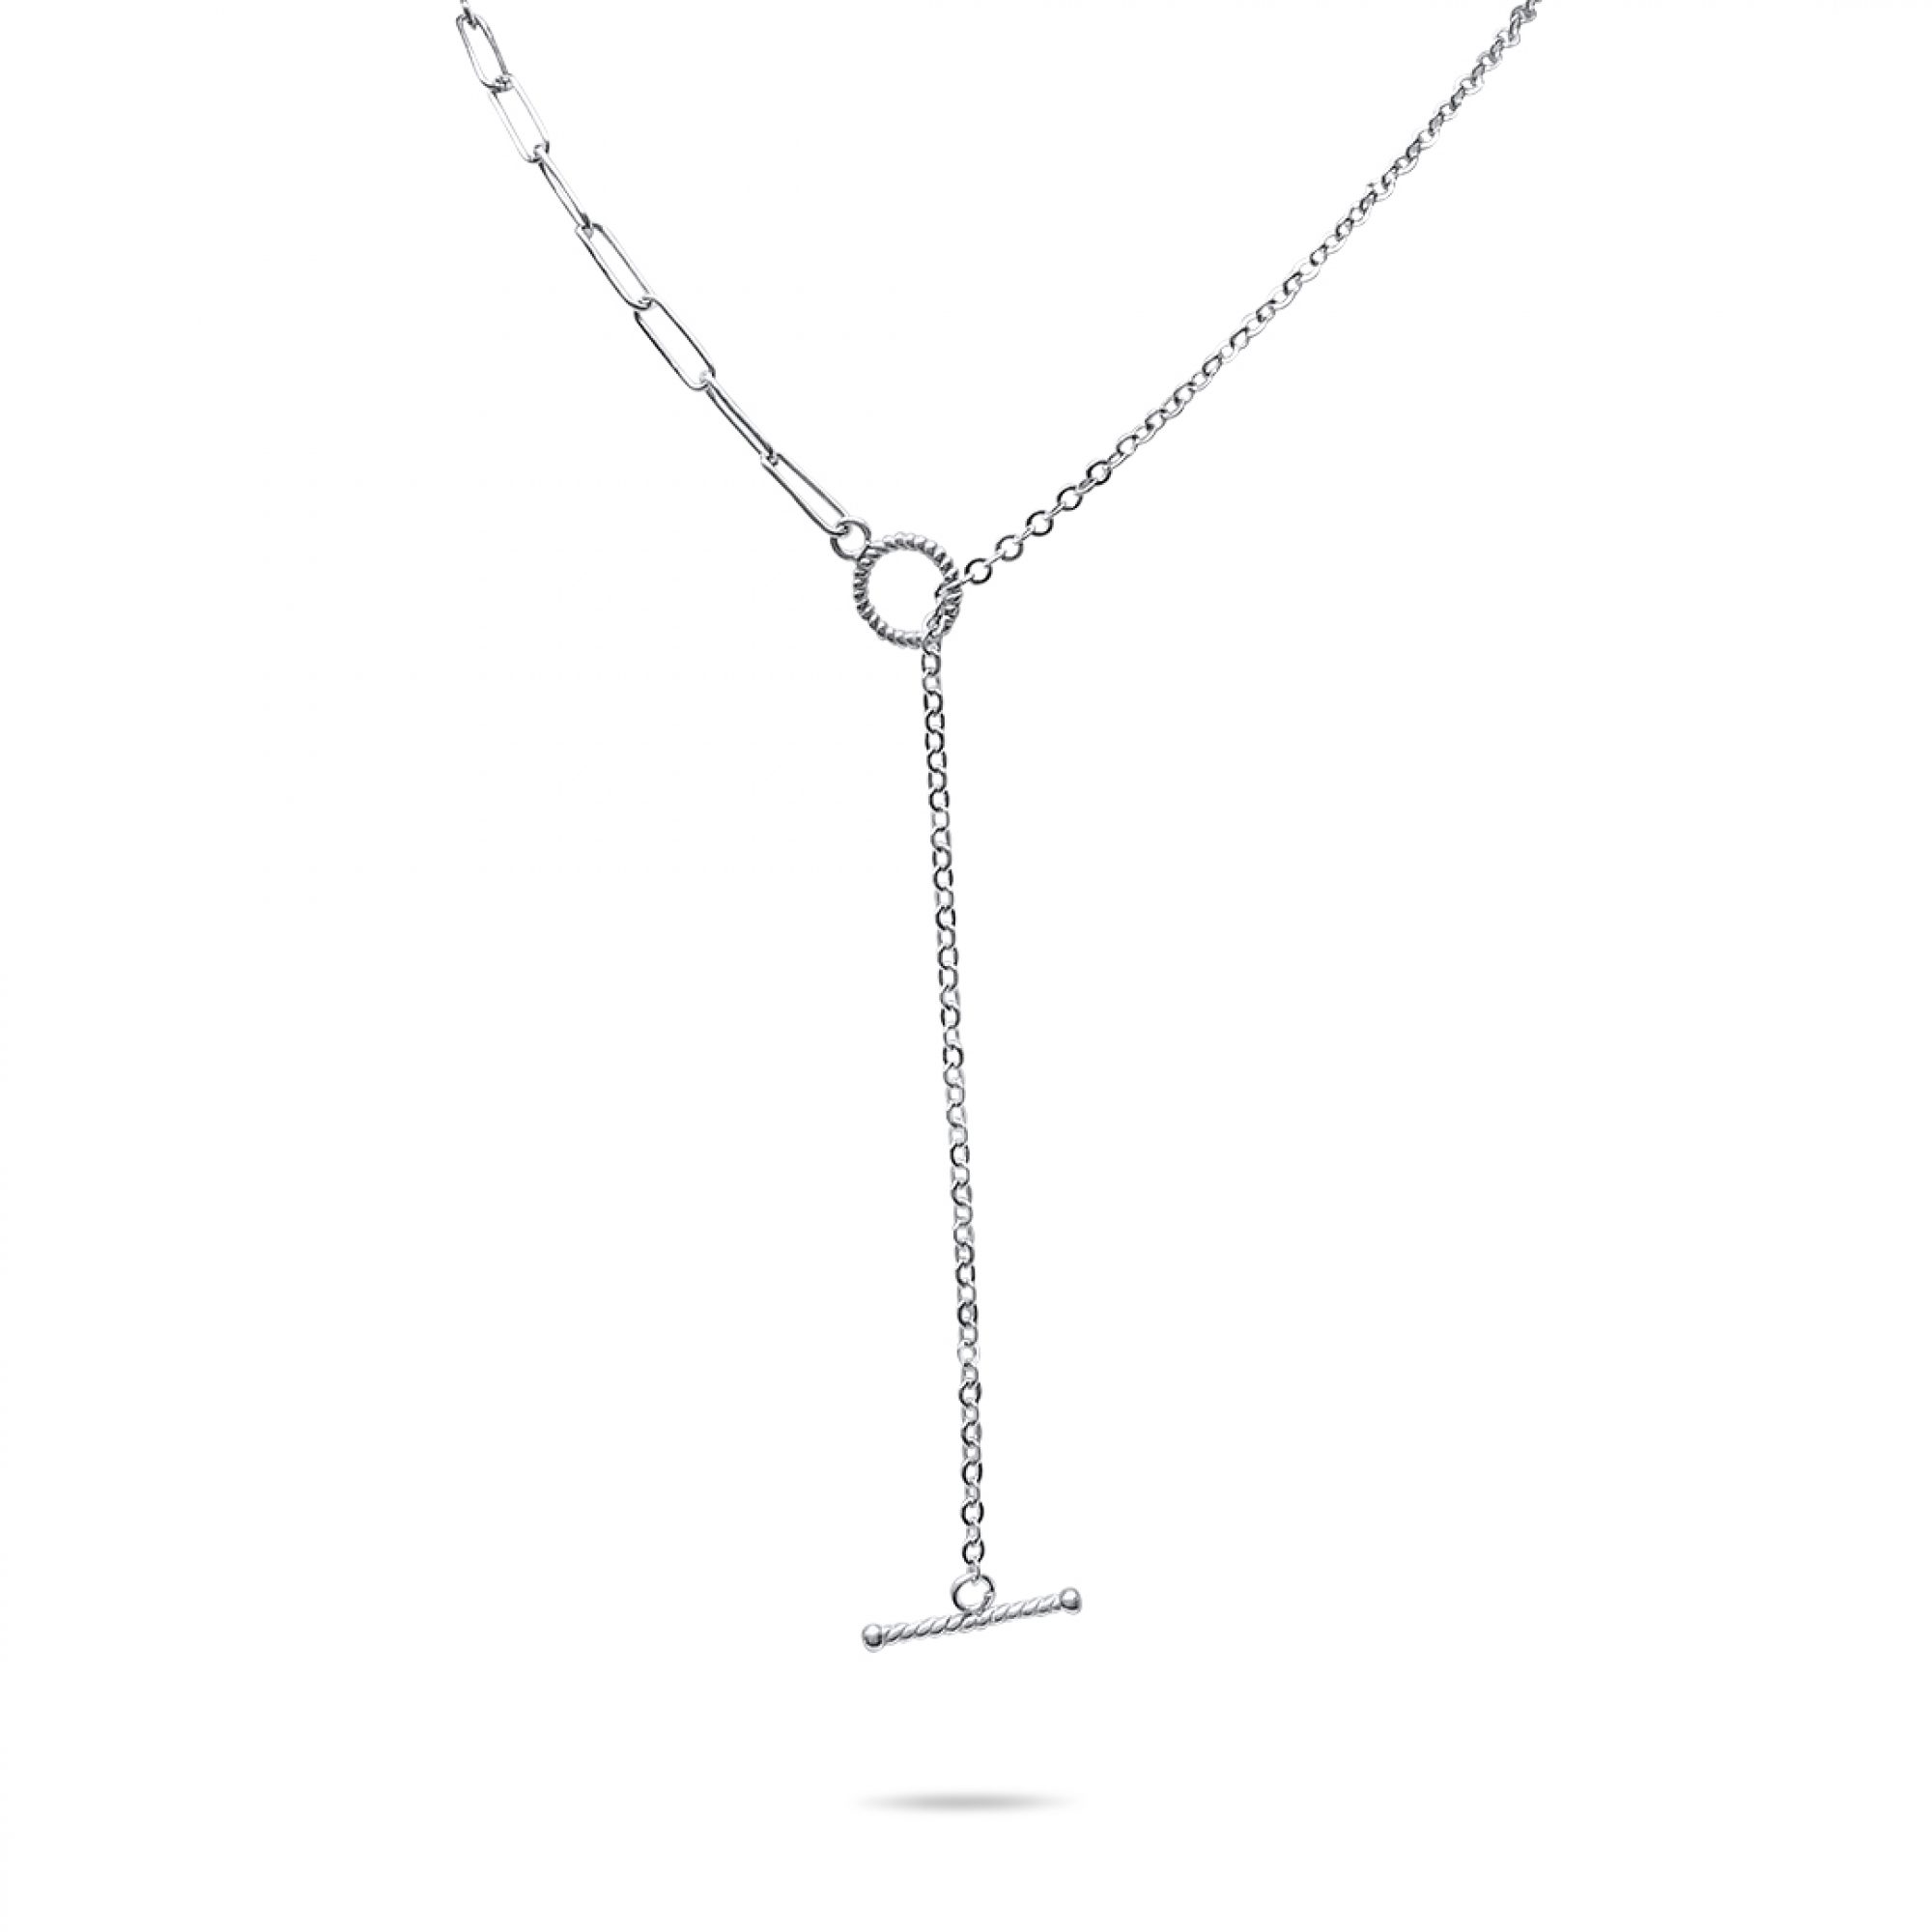 Y-style chain necklace 